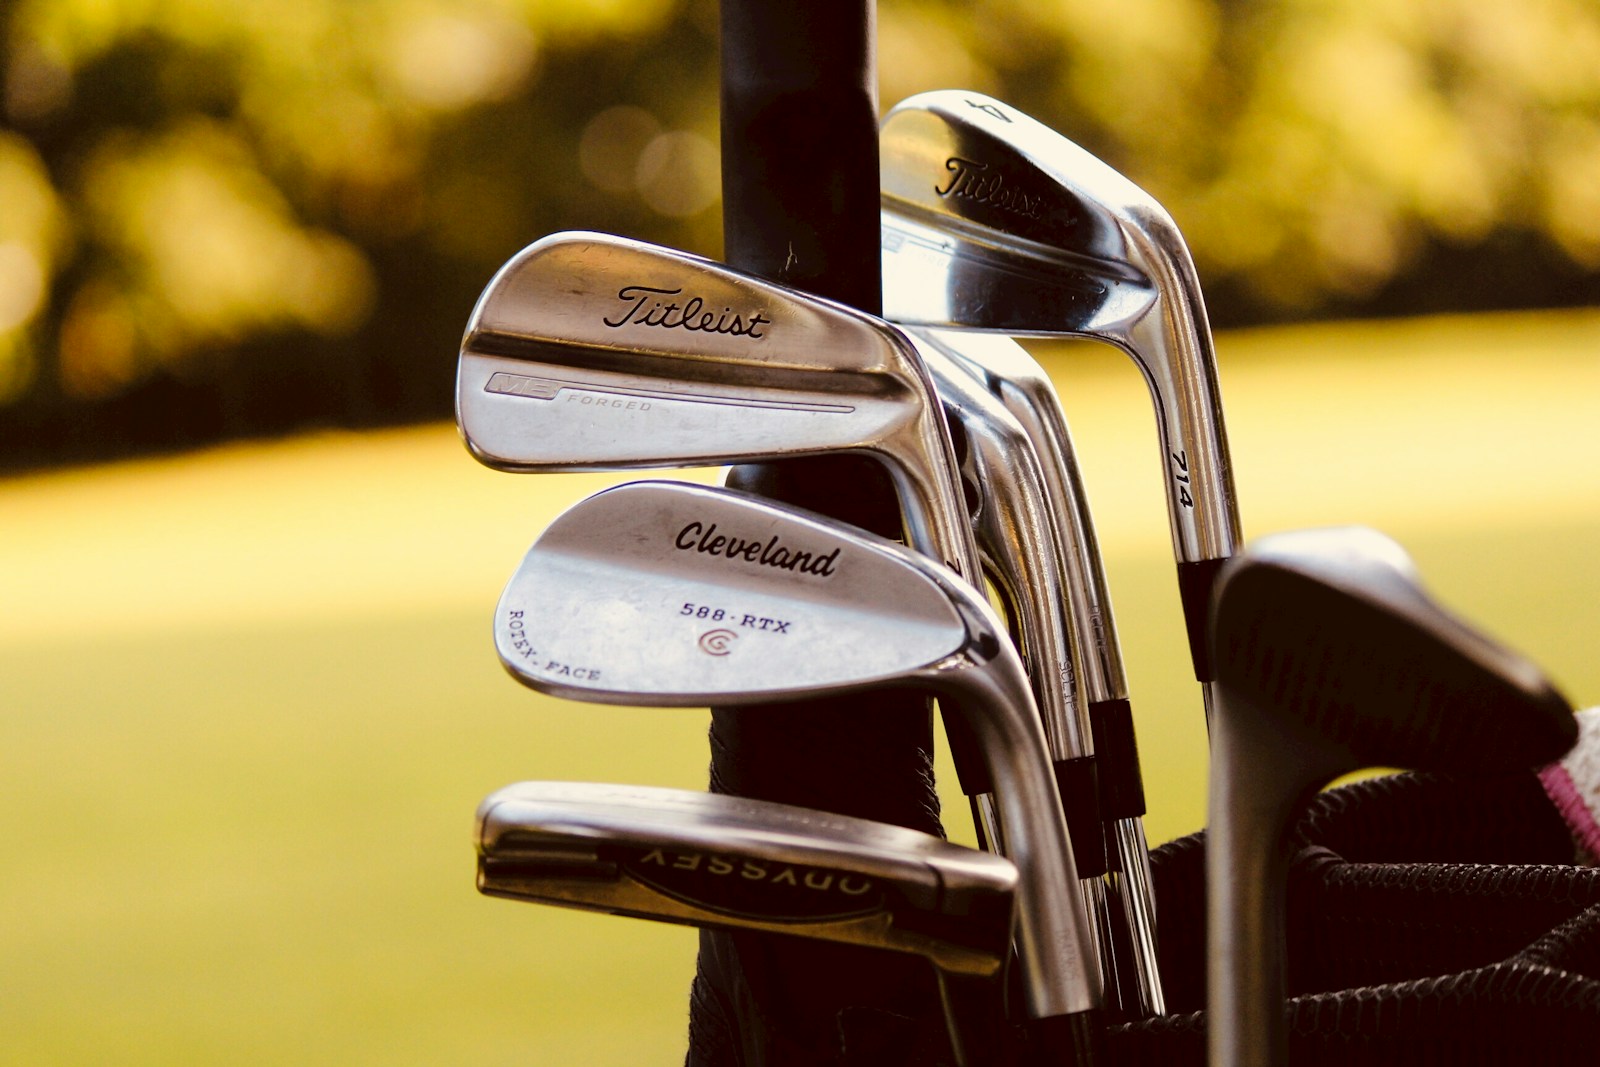 gray steel golf clubs on selective focus photo